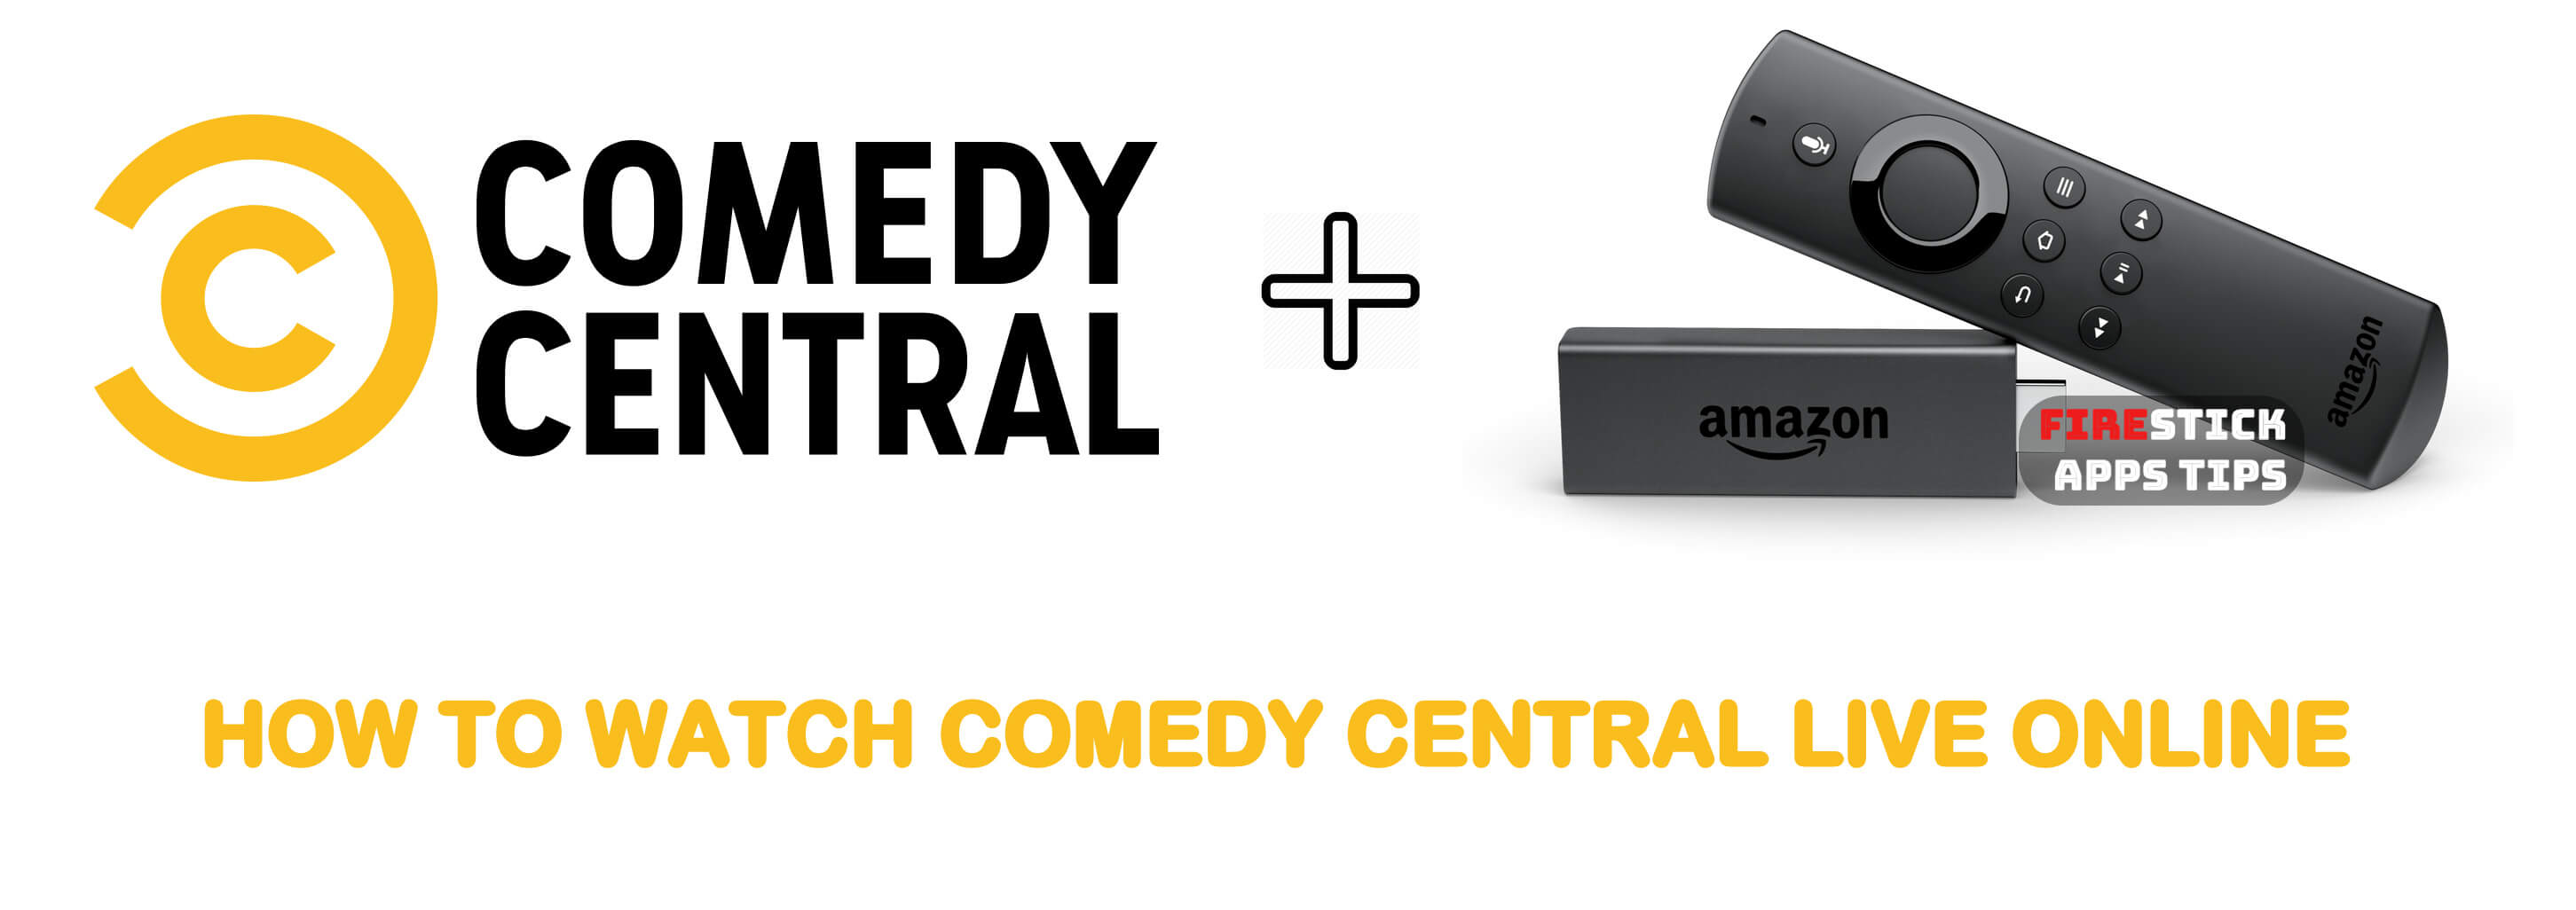 Comedy Central Live Online